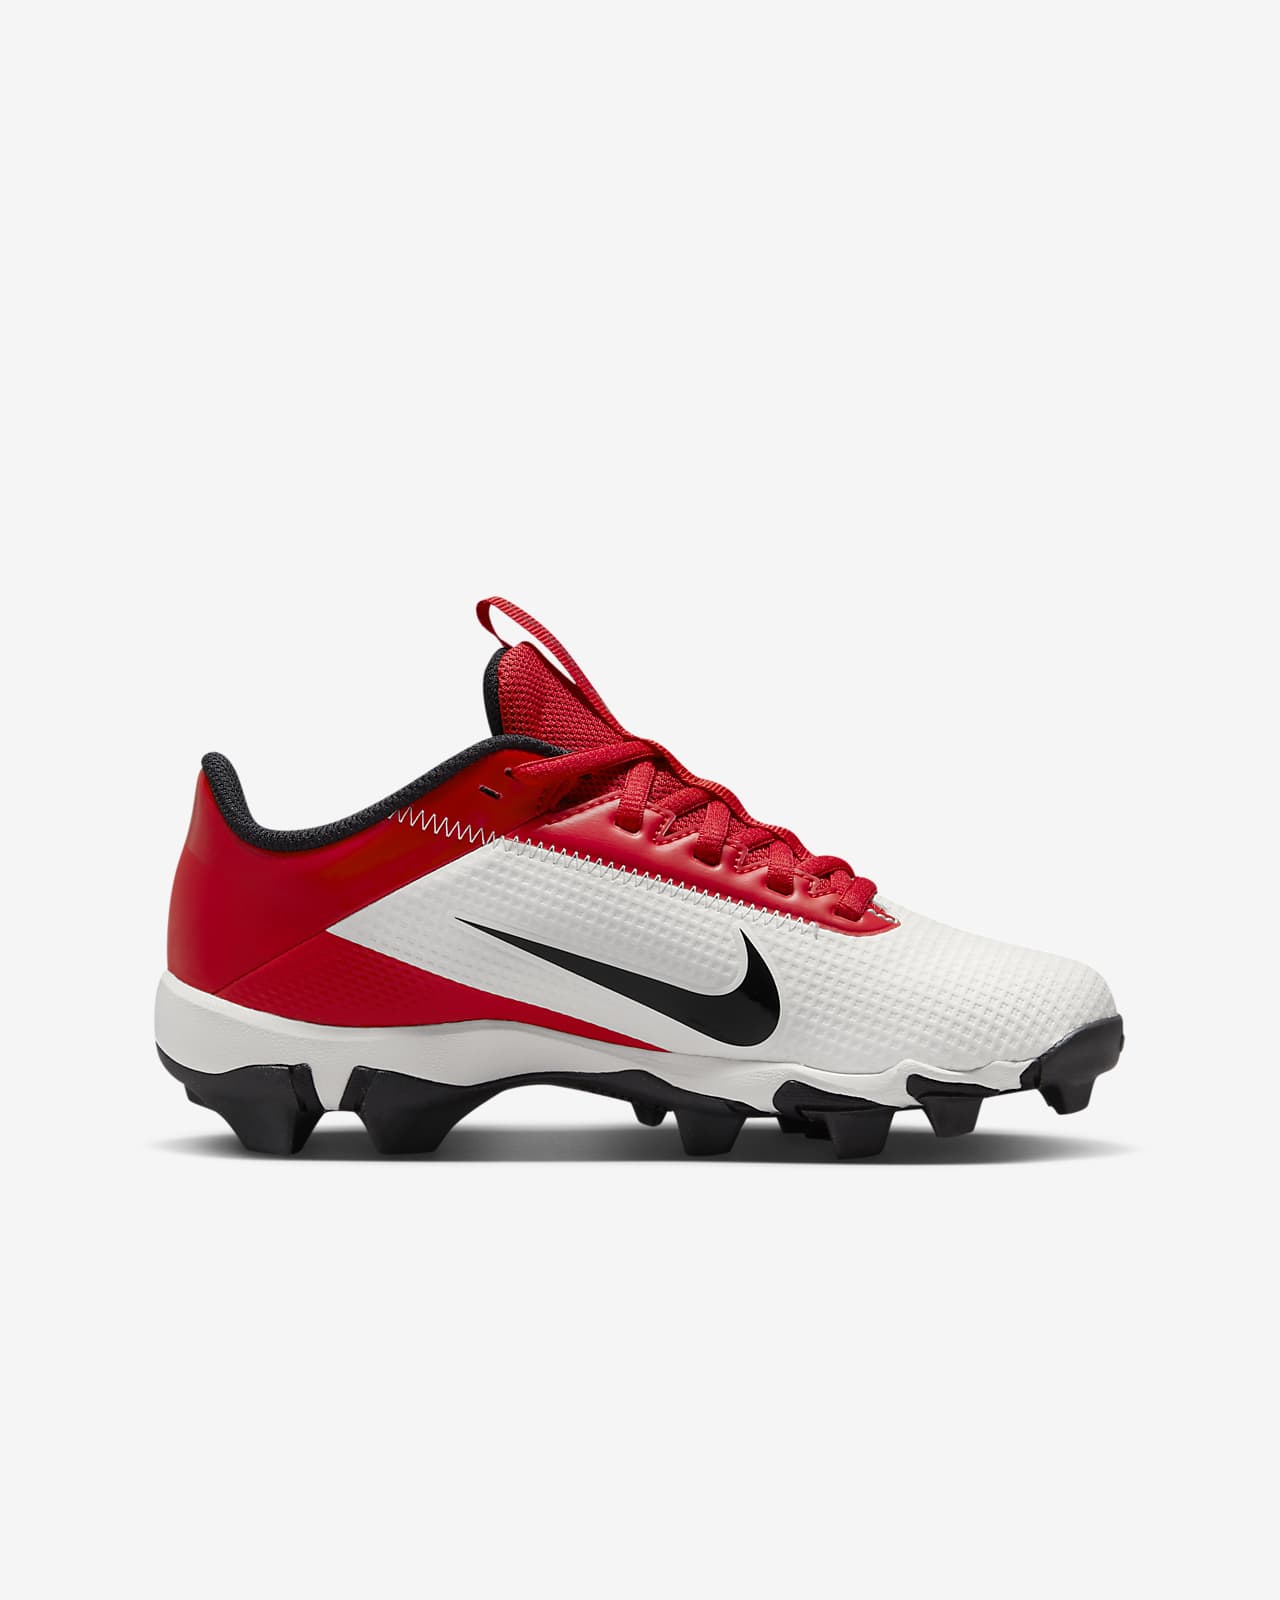 Nike Red And White Cleats | lupon.gov.ph